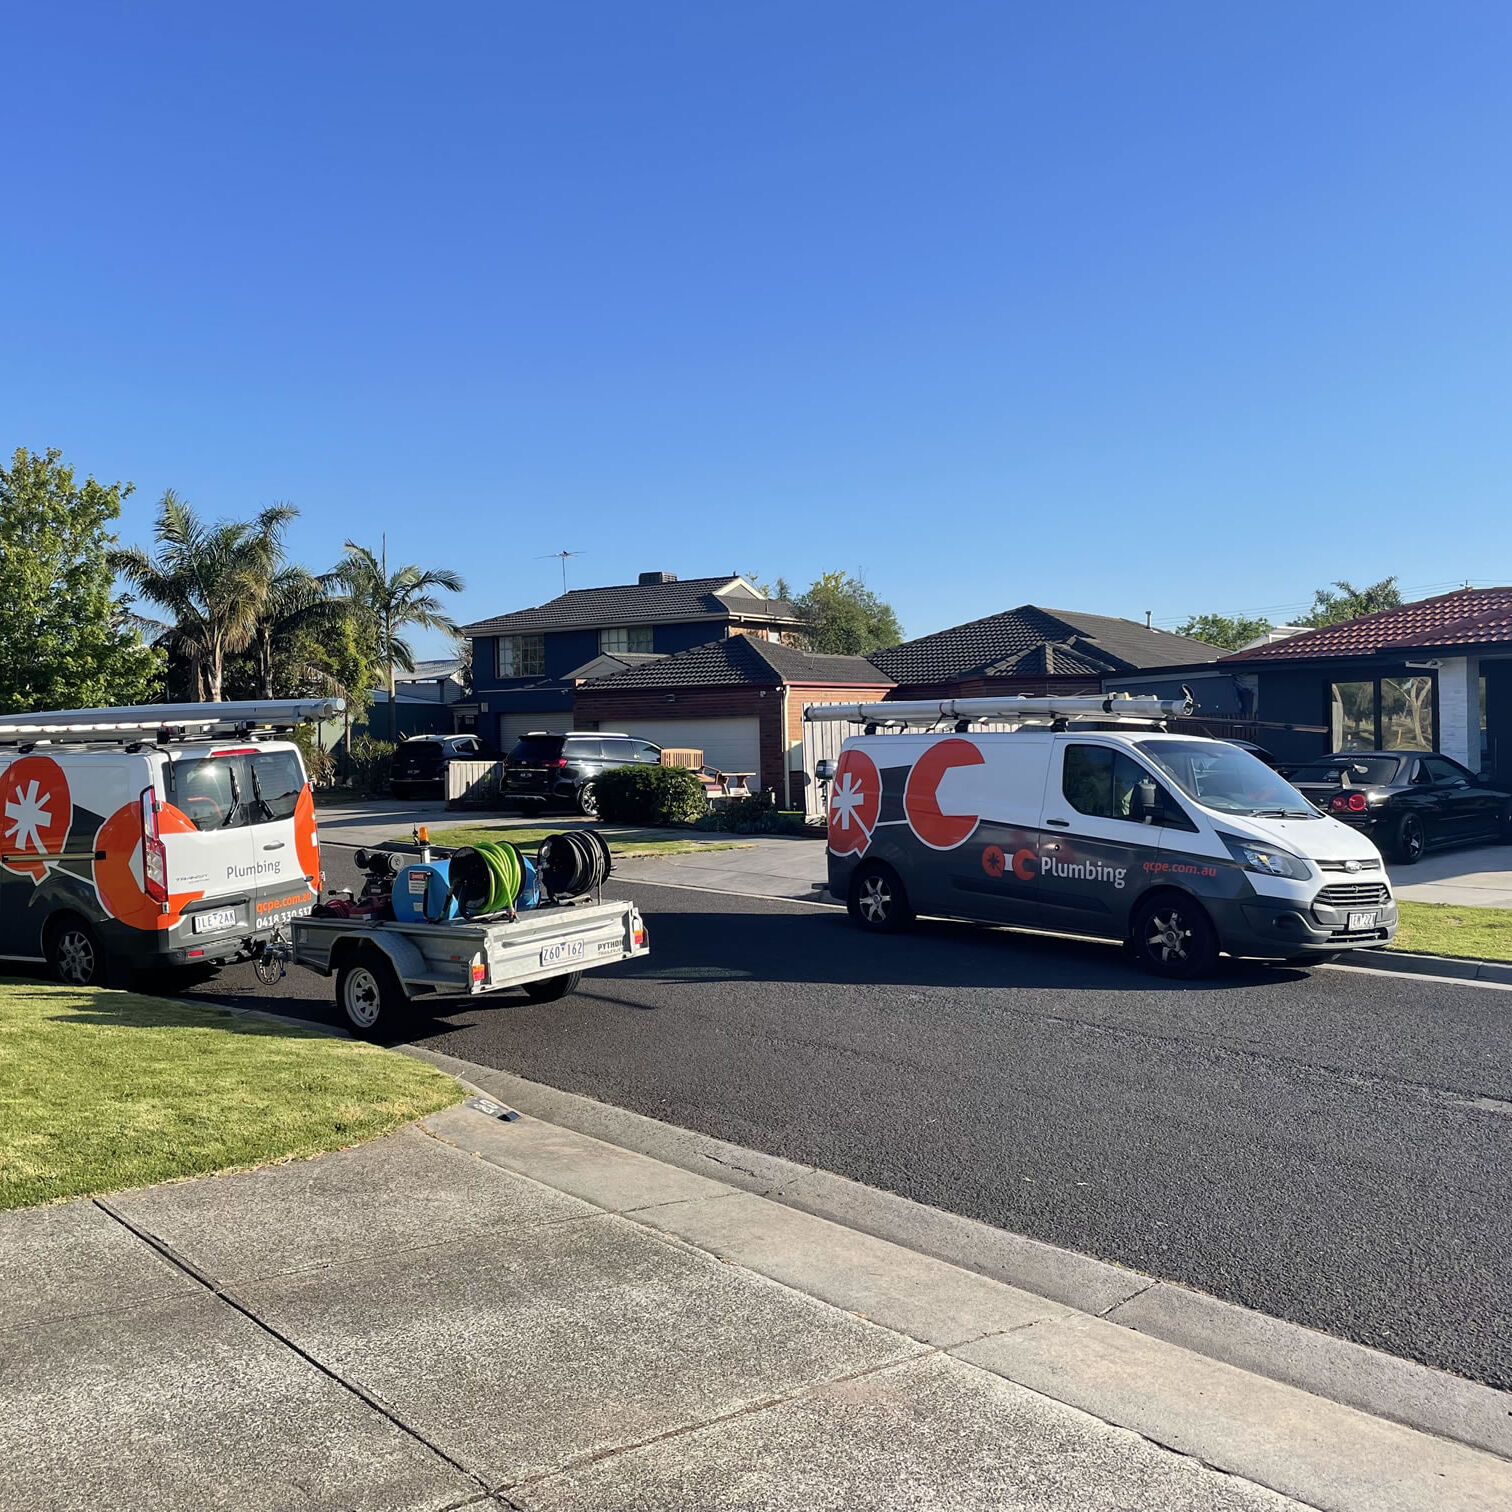 QC Plumbing out in the Suburbs